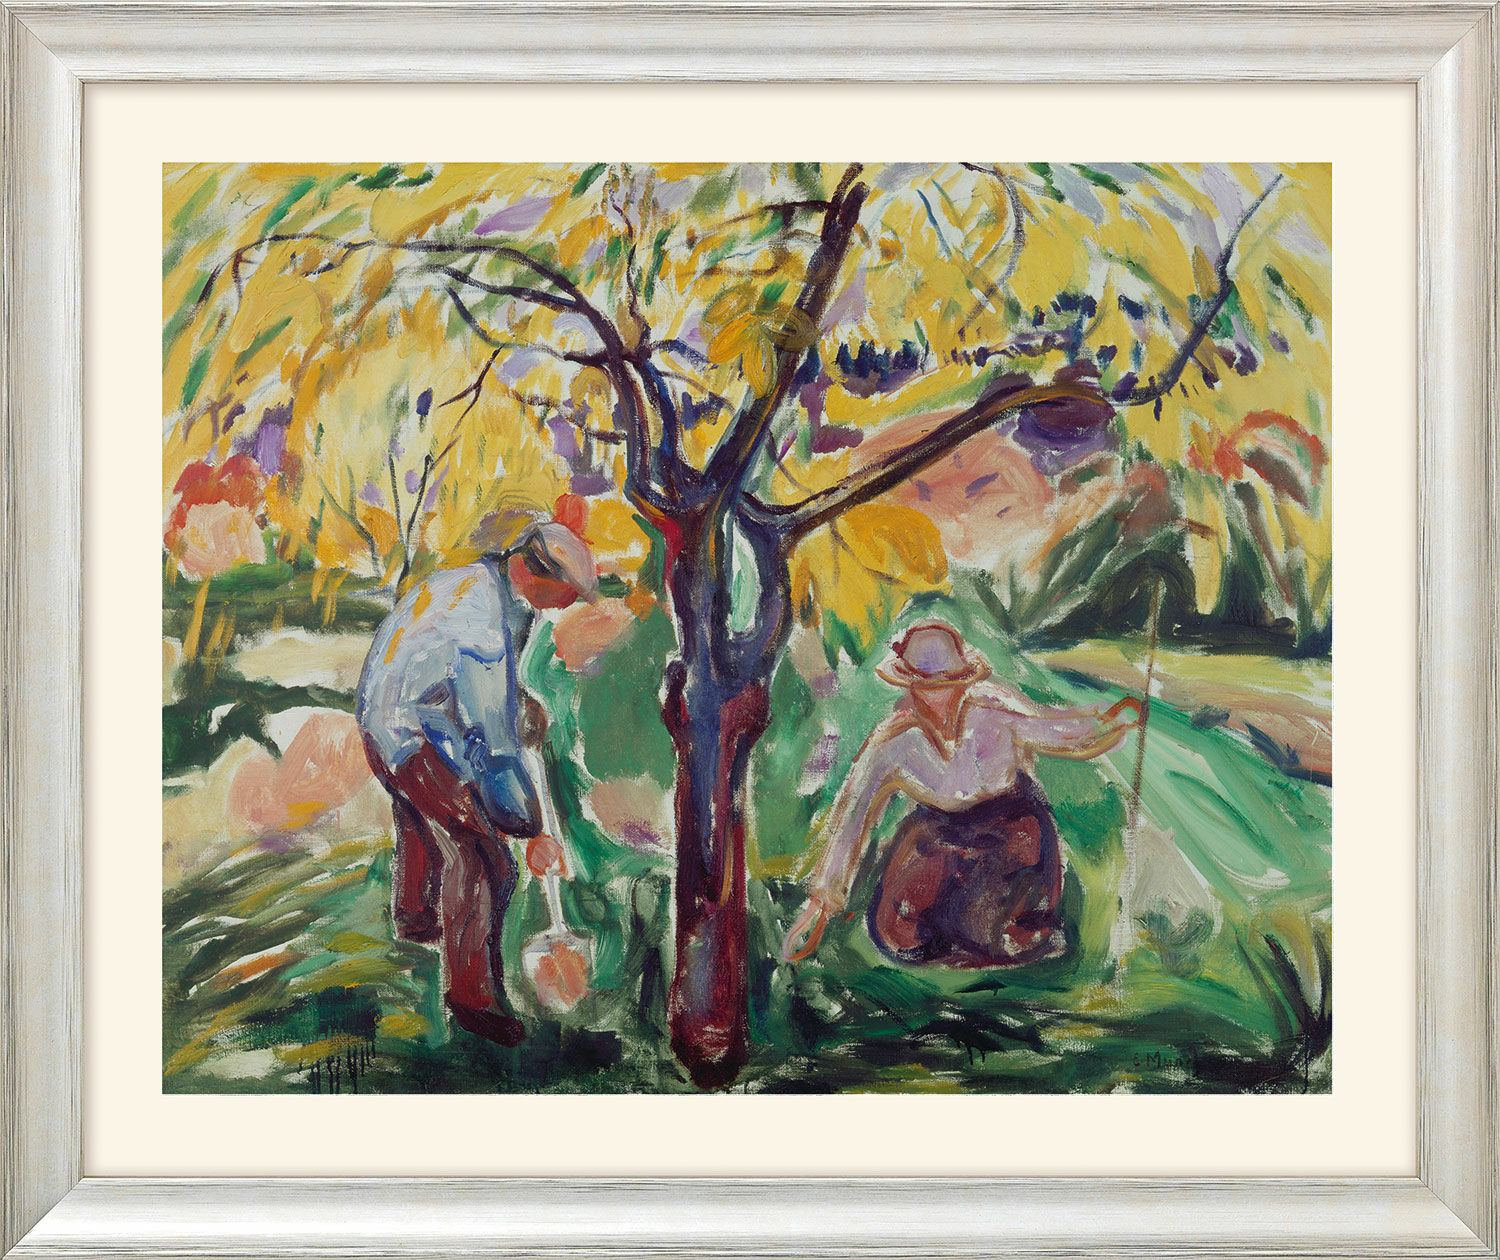 Picture "Apple Tree" (1921) - from "Seasons Cycle", silver-coloured framed version by Edvard Munch